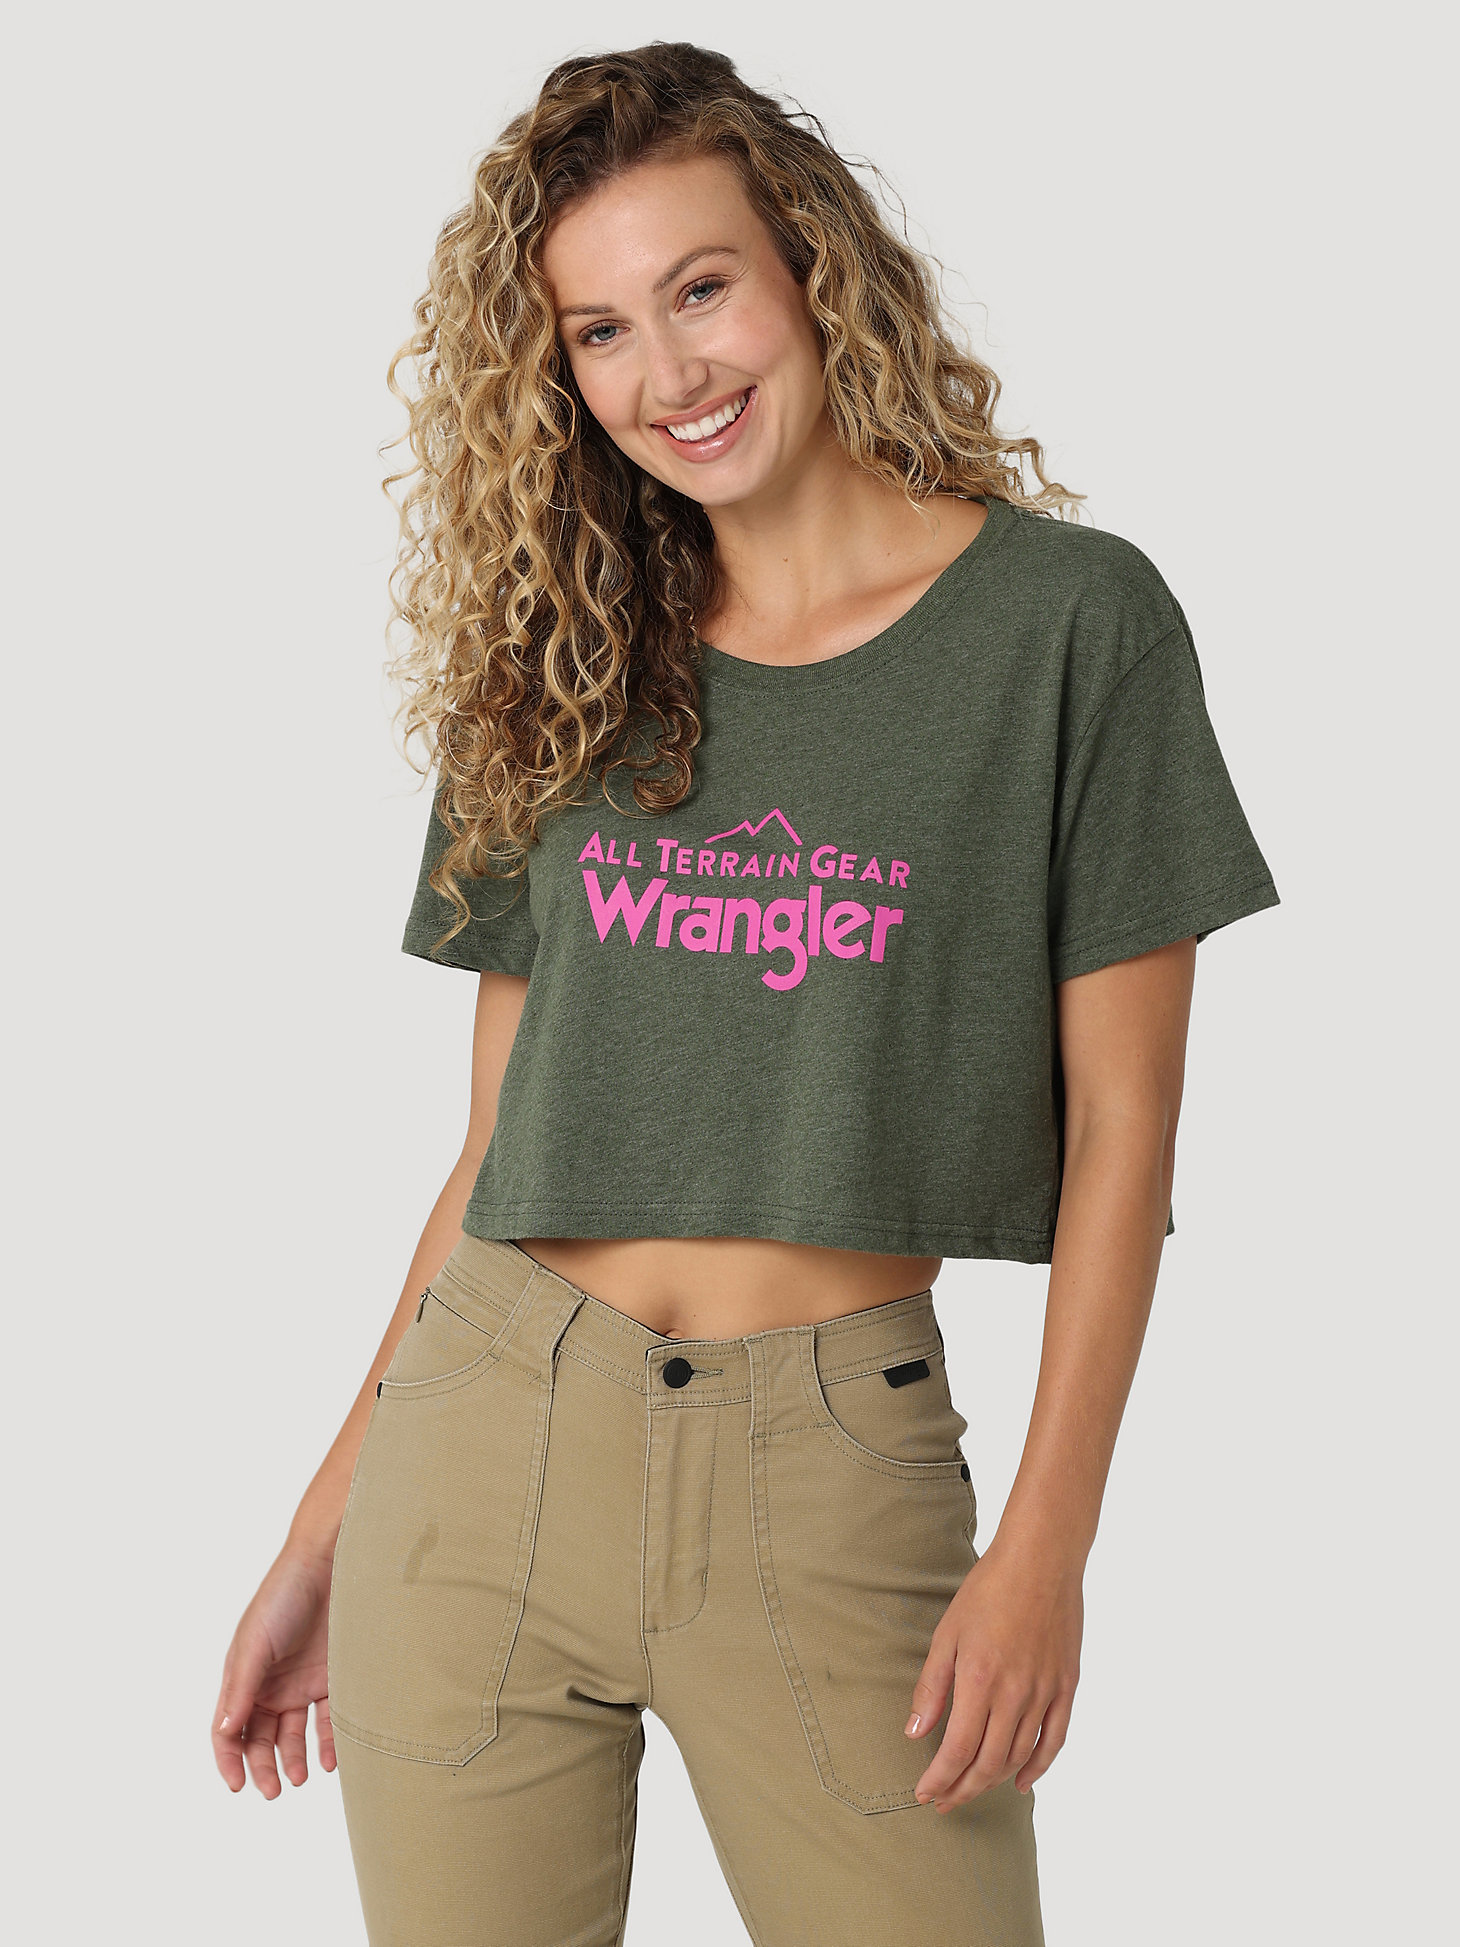 ATG By Wrangler™ Women's Logo Graphic Crop Tee in Black Forest Heather main view